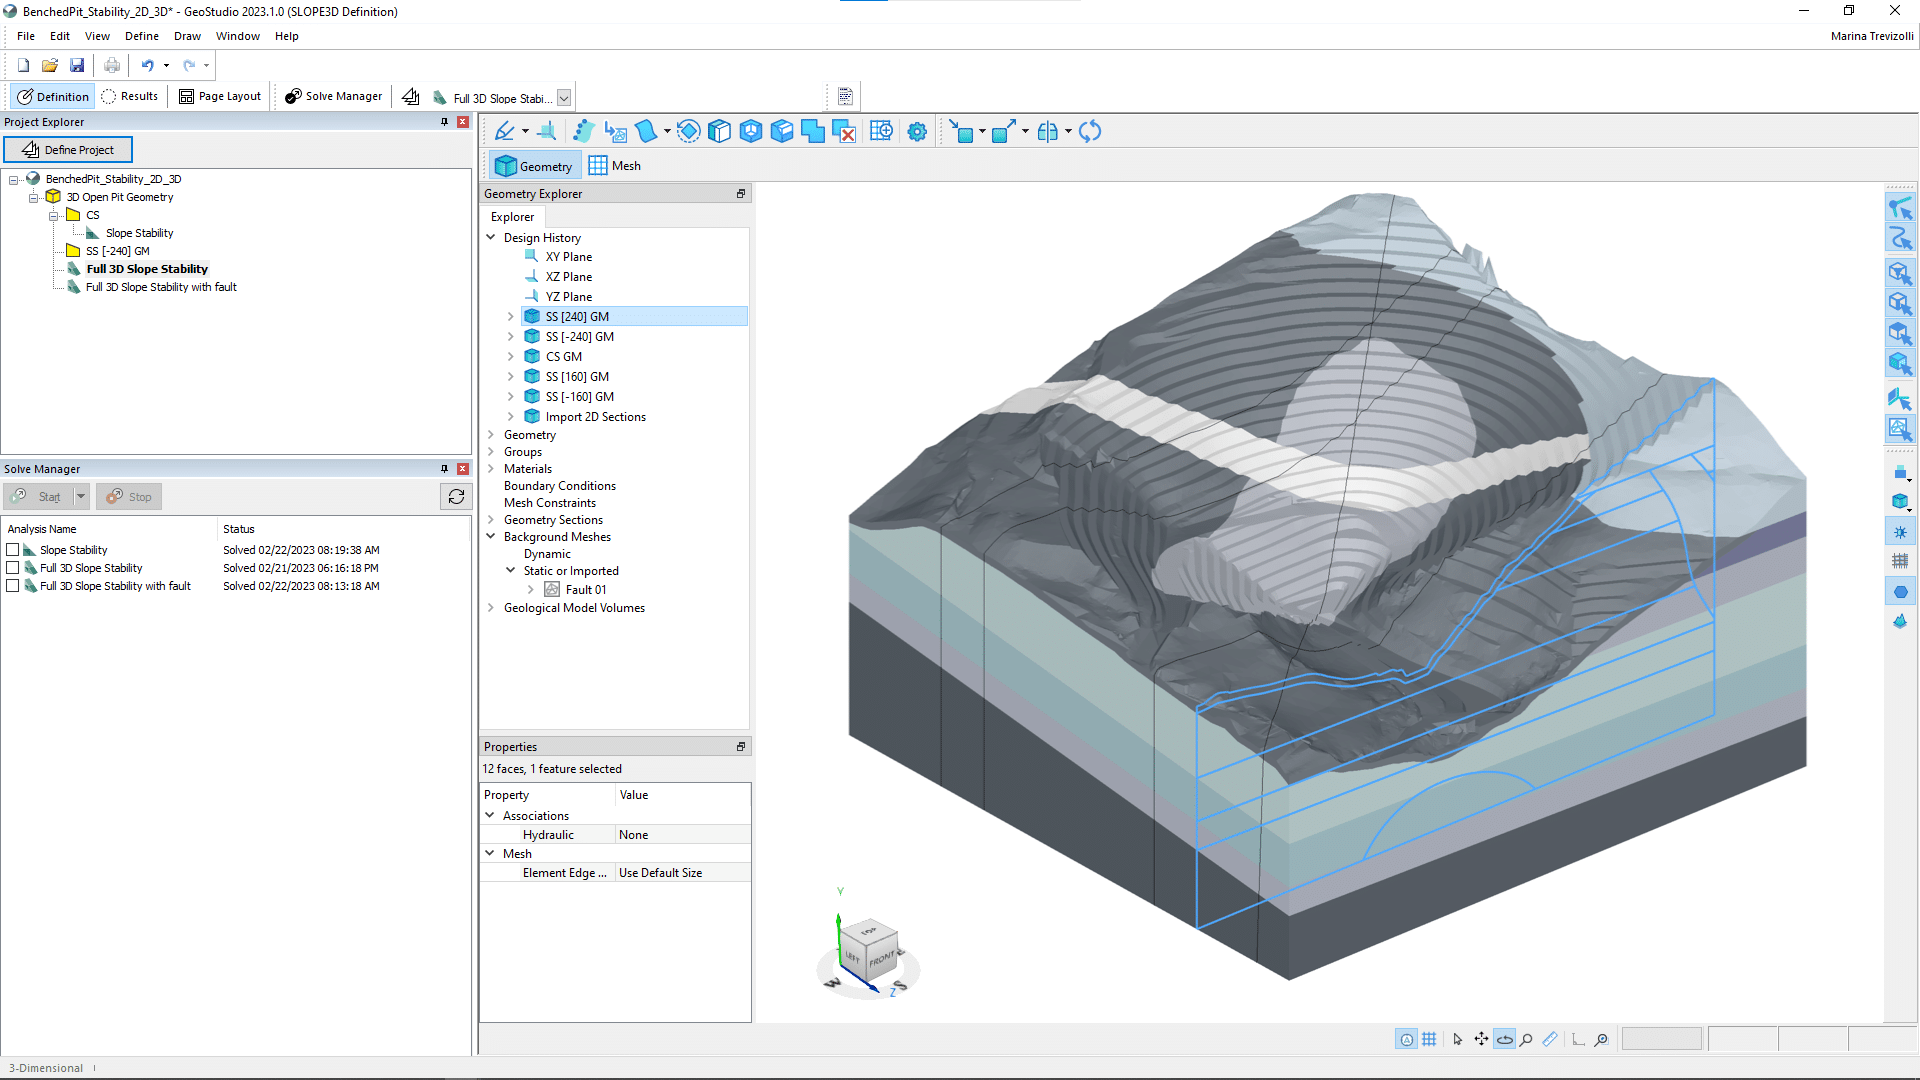 A screenshot of a 3D model in Seequent's GeoStudio SLOPE3D